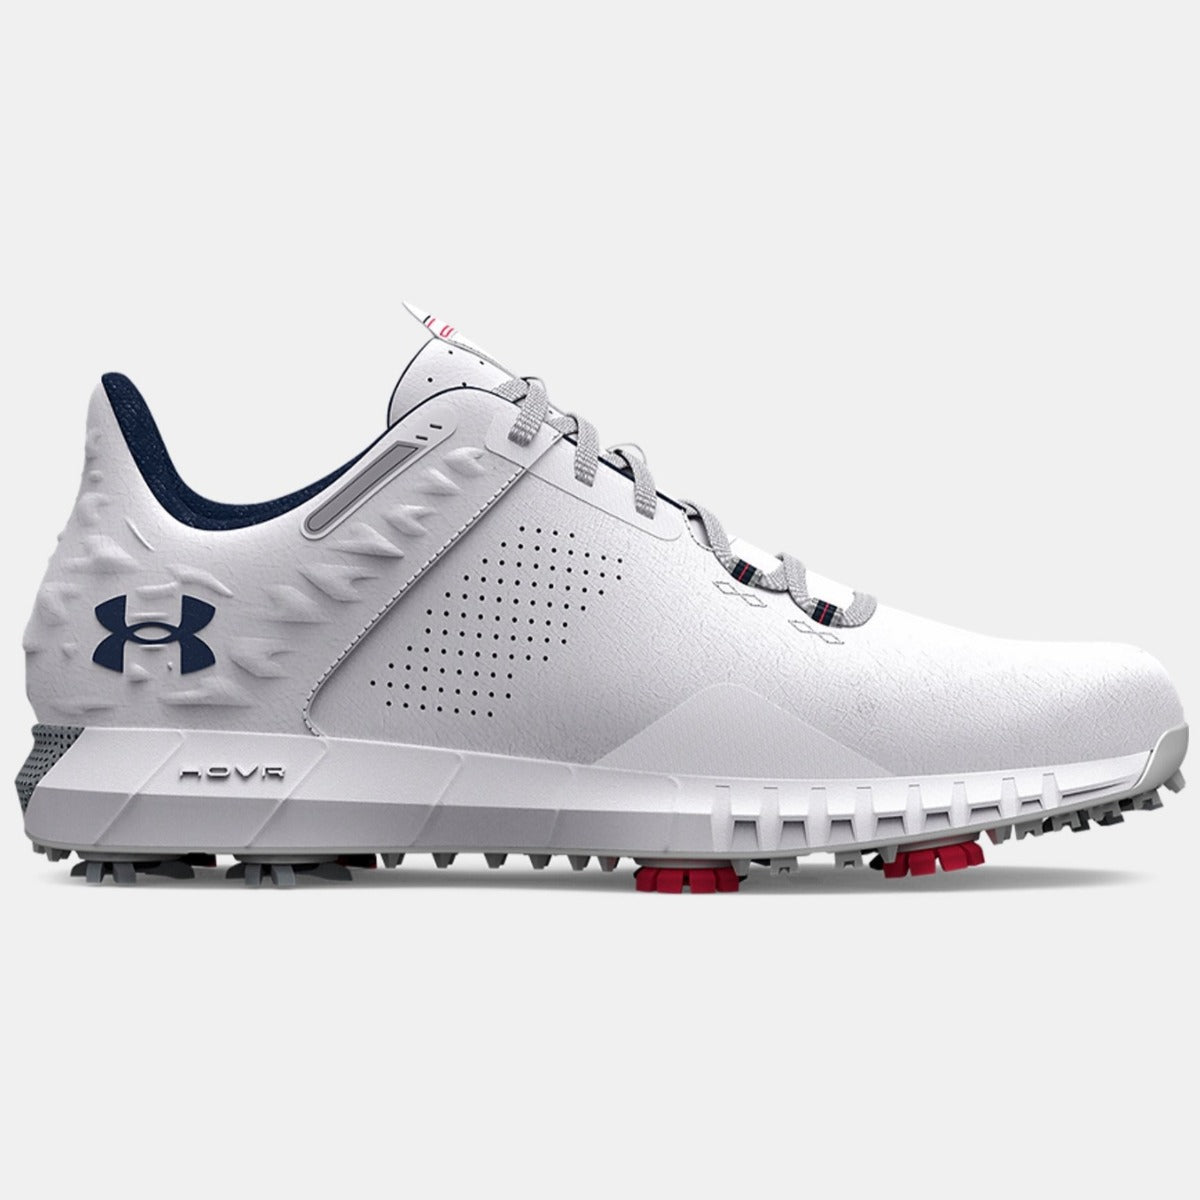 Under Armour Hovr Drive 2 Wide Golf Shoe Mens (White 100)